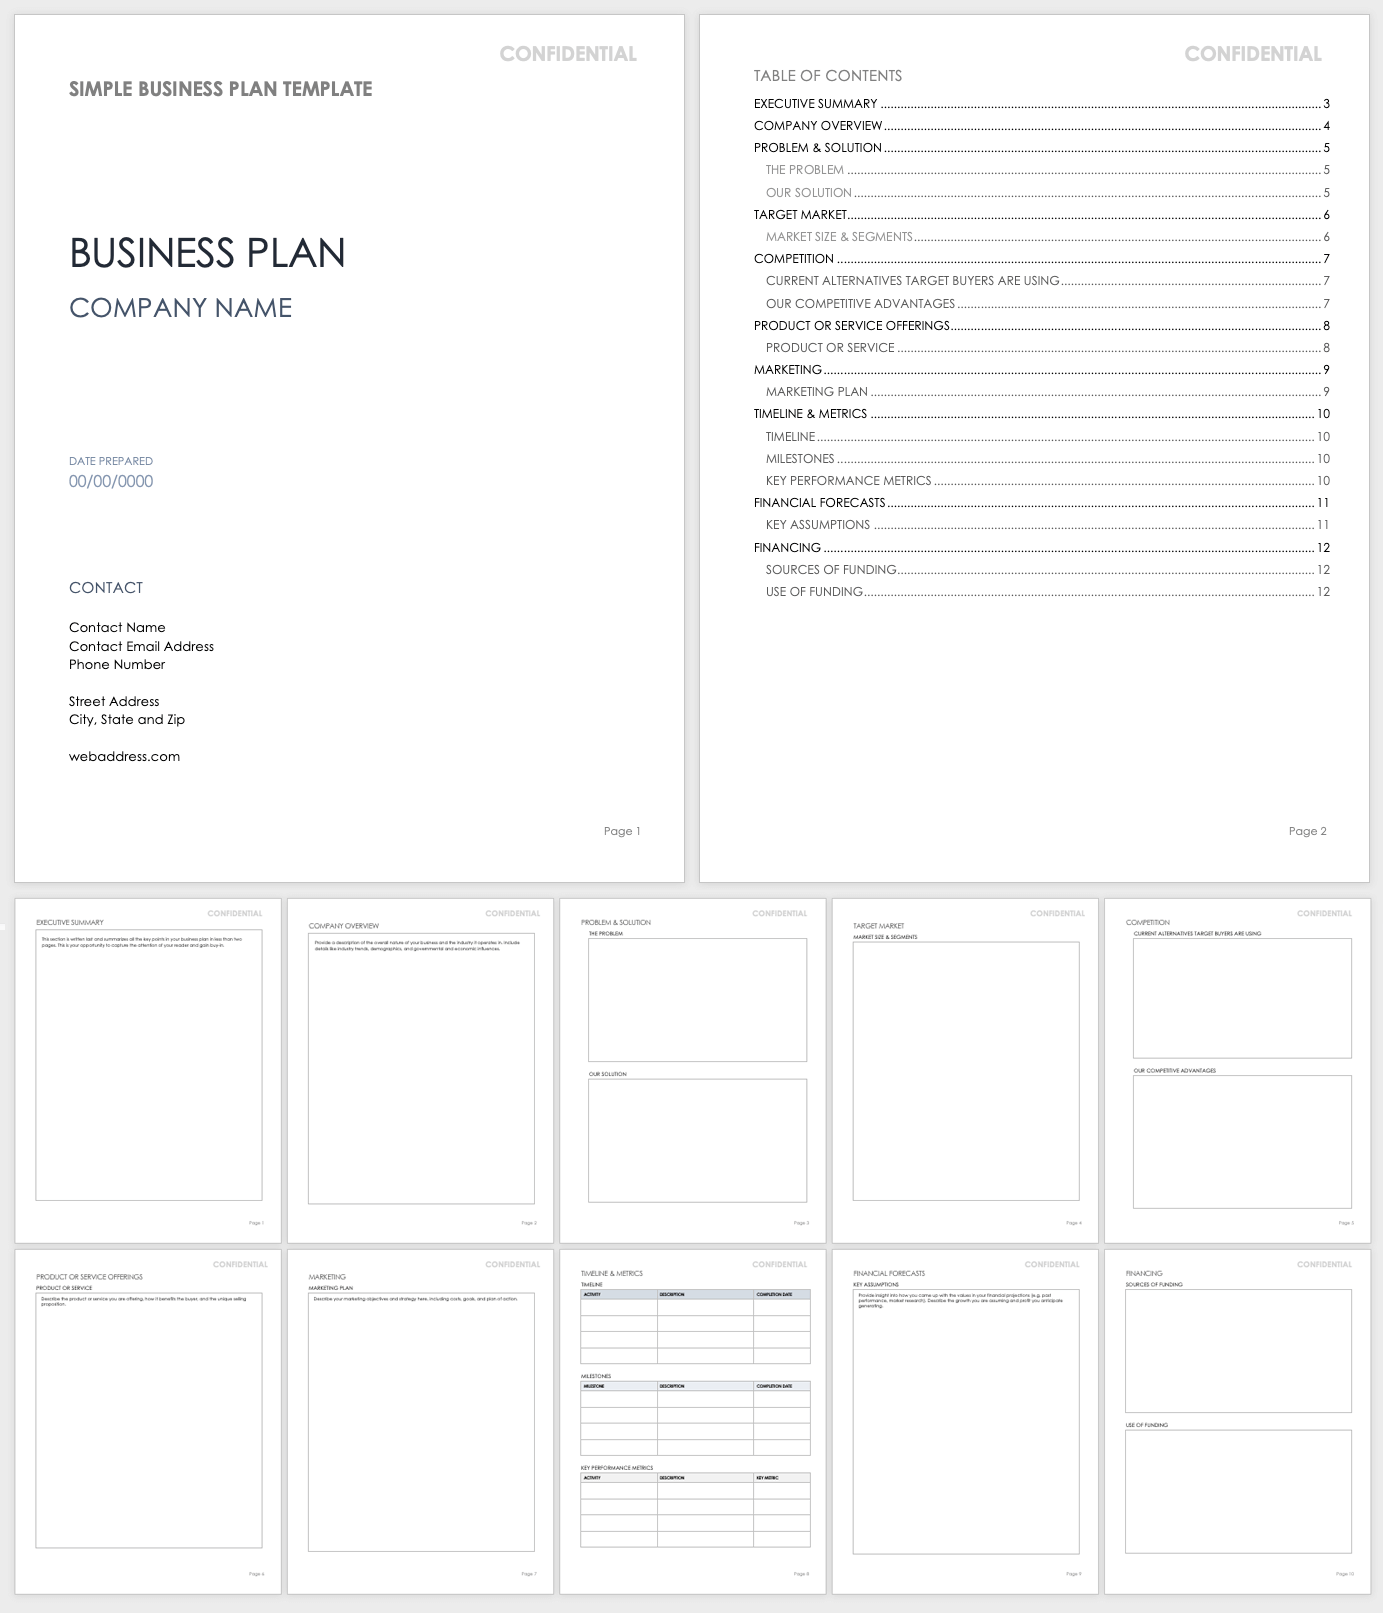 business plan contents template